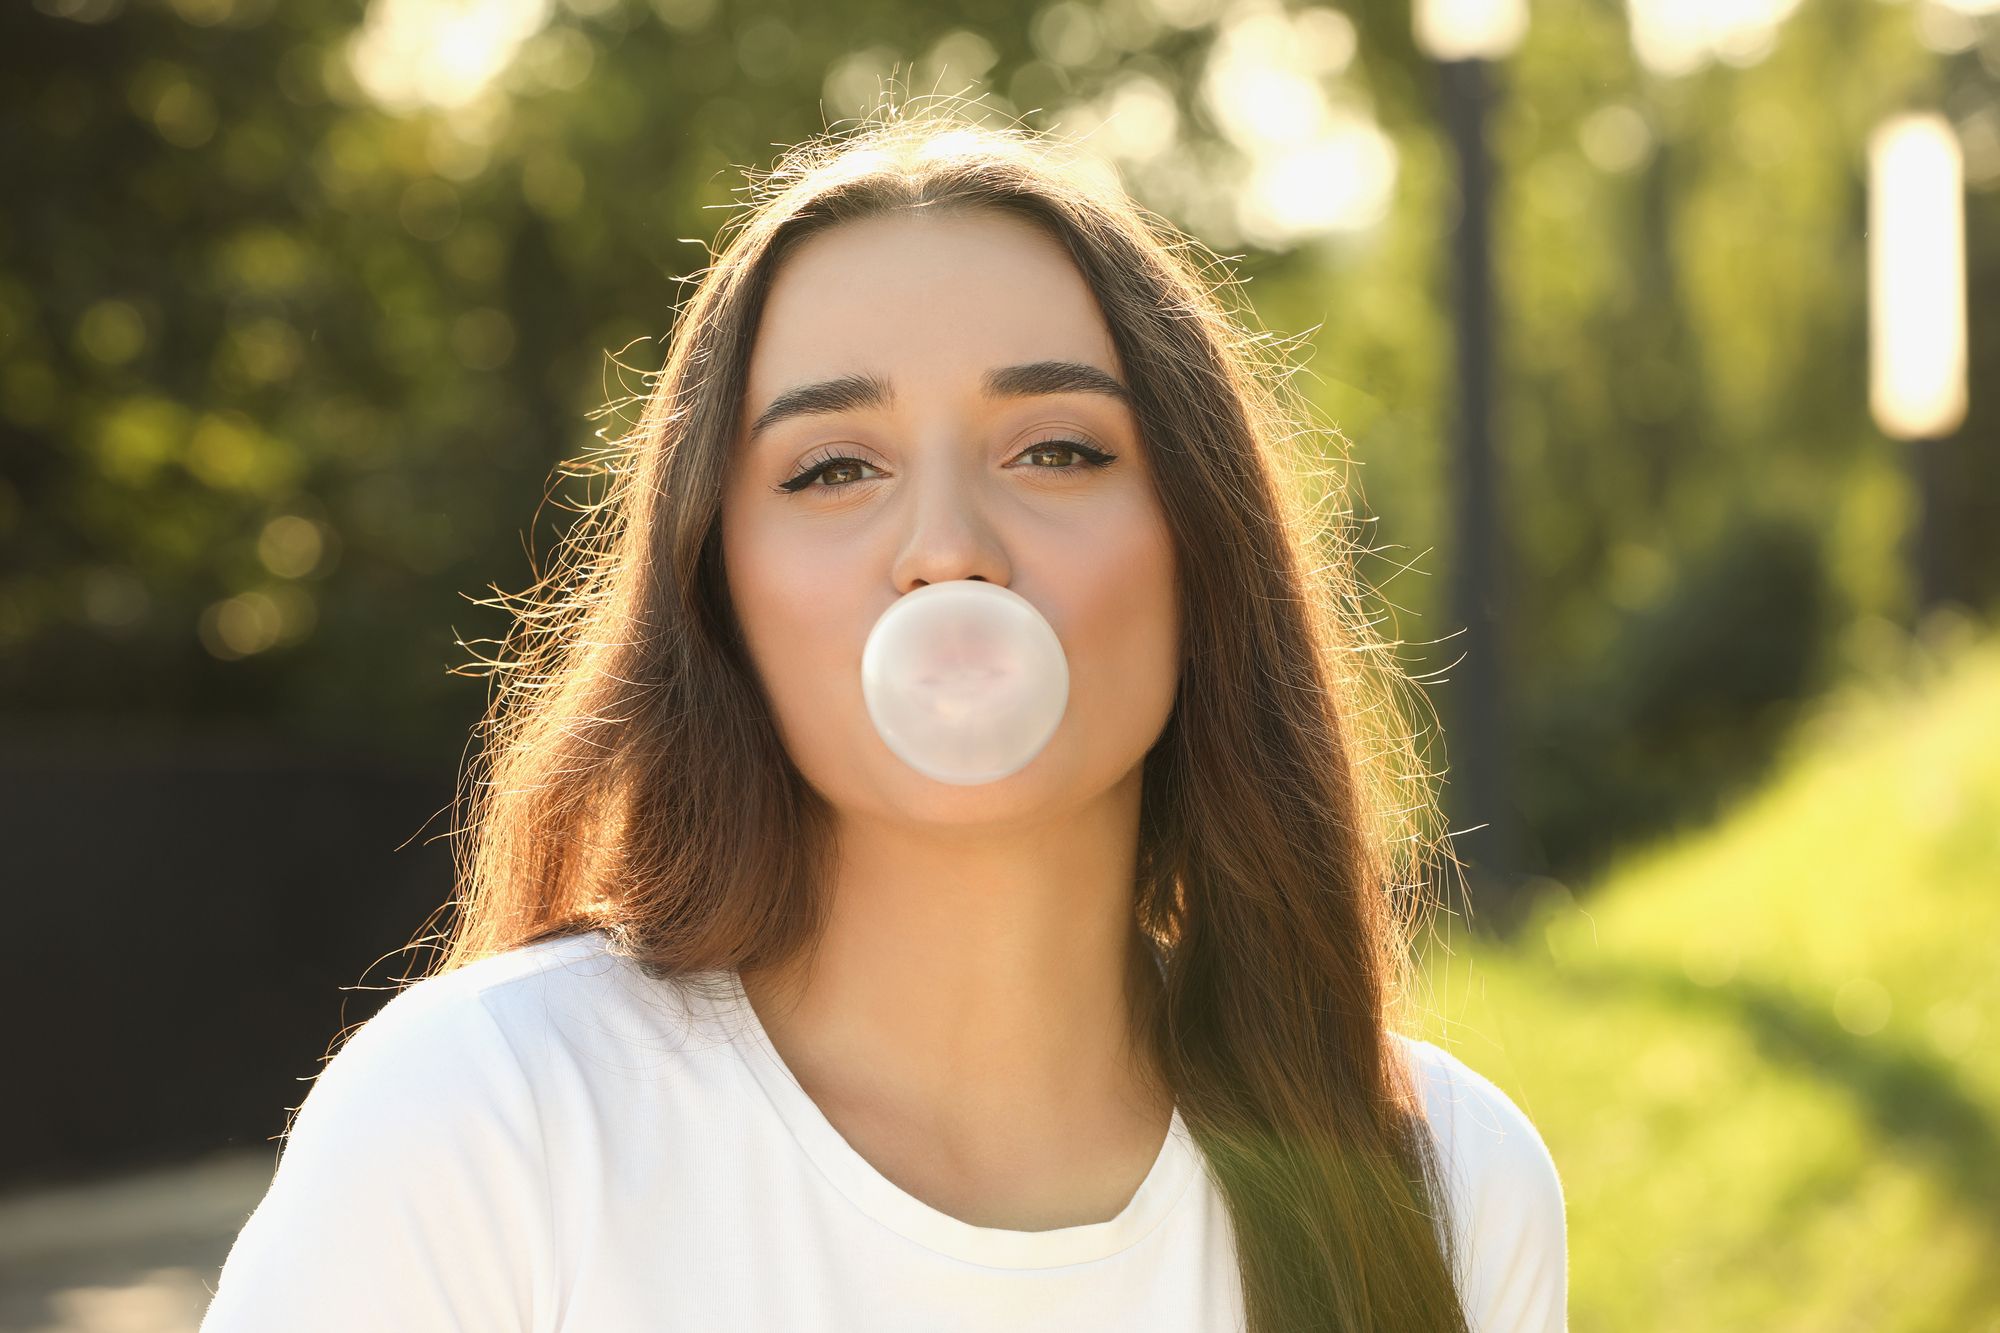 young woman with long brown hair blowing a bubble with gum